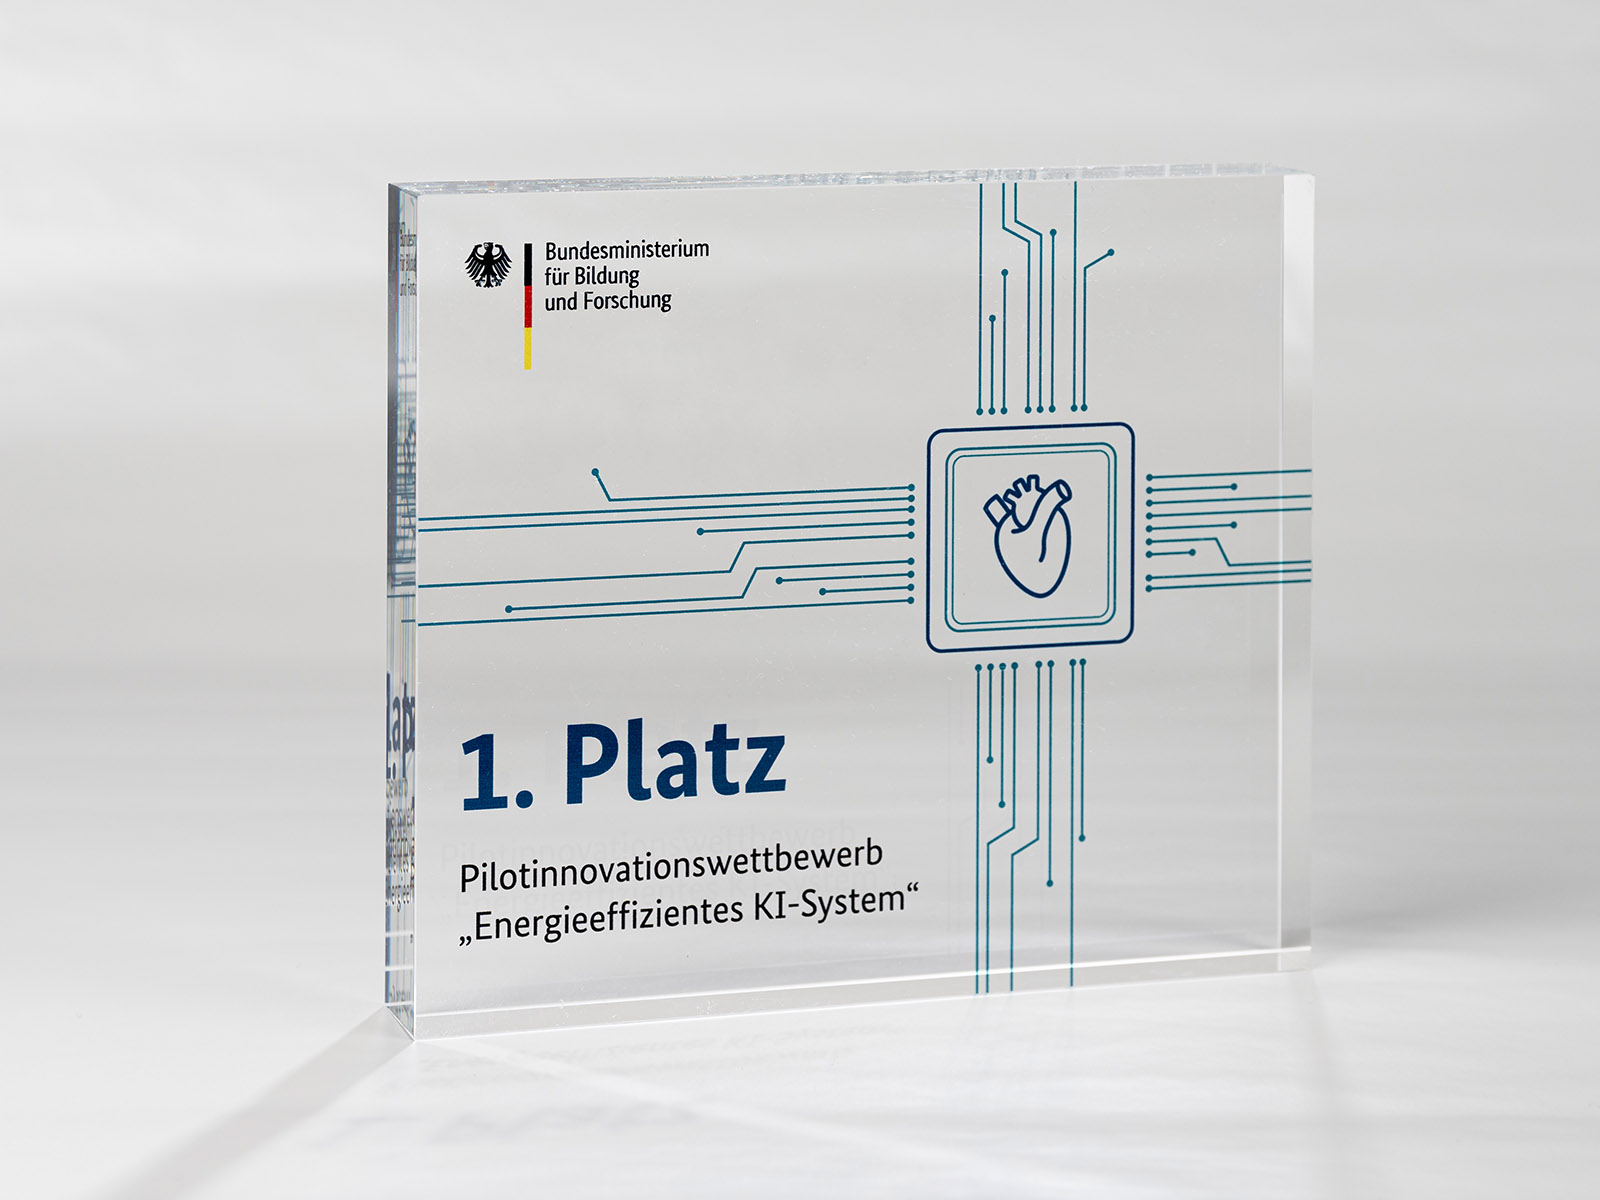 Fraunhofer ITWM and Fraunhofer IIS were awarded first places for their research work in the pilot innovation contest “Energy-efficient AI system”.